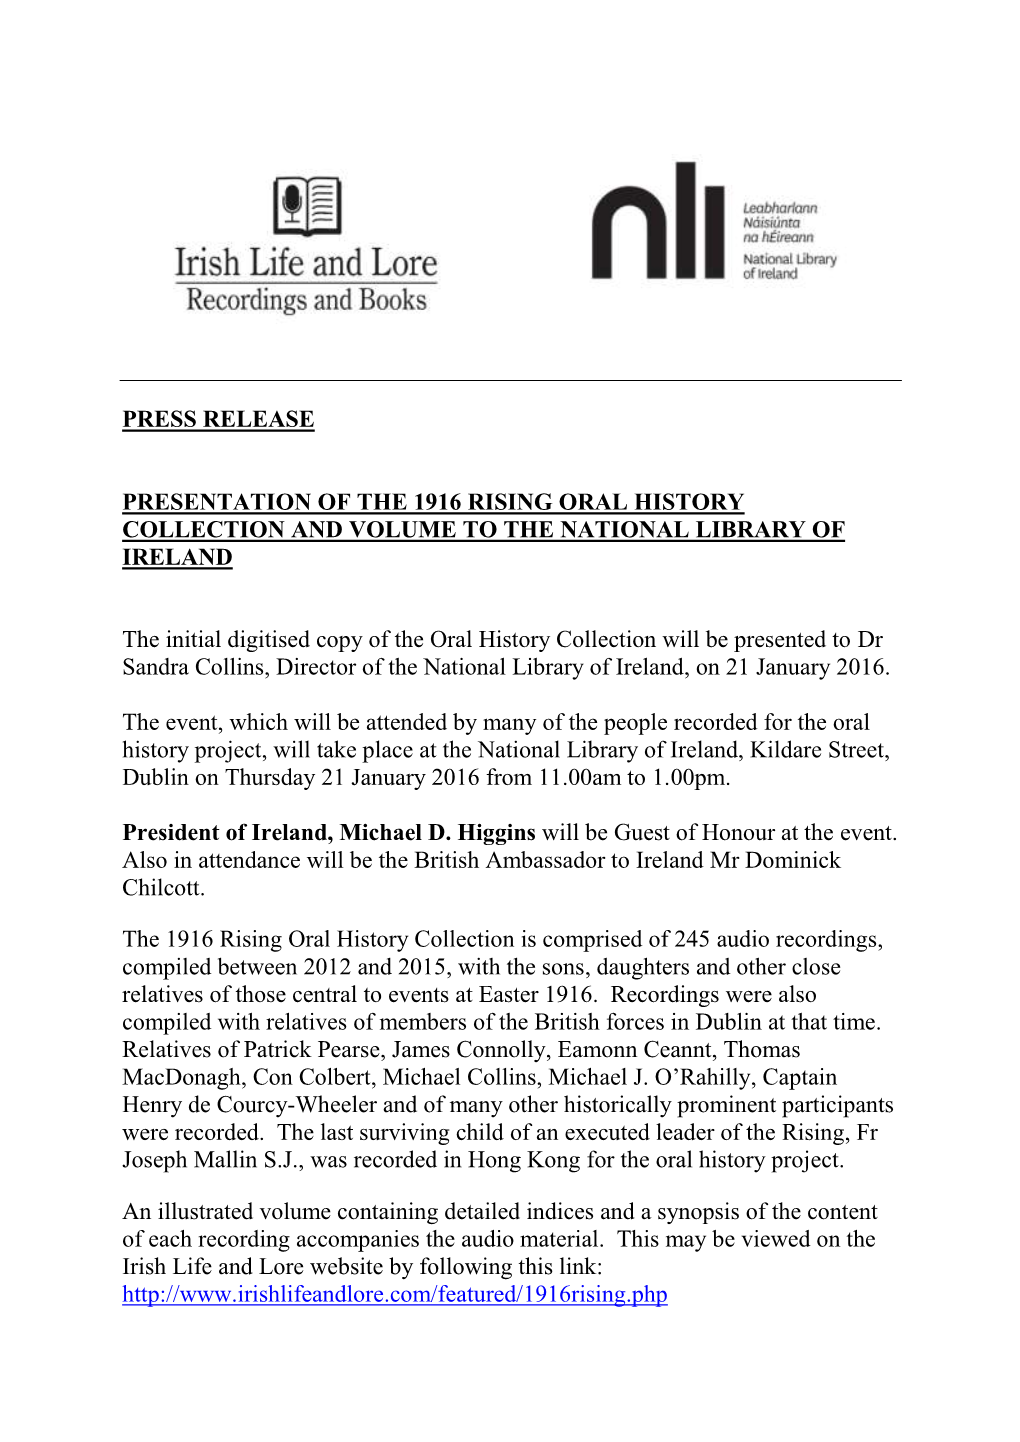 Presentation of 1916 Rising Oral History Collection and Volume To